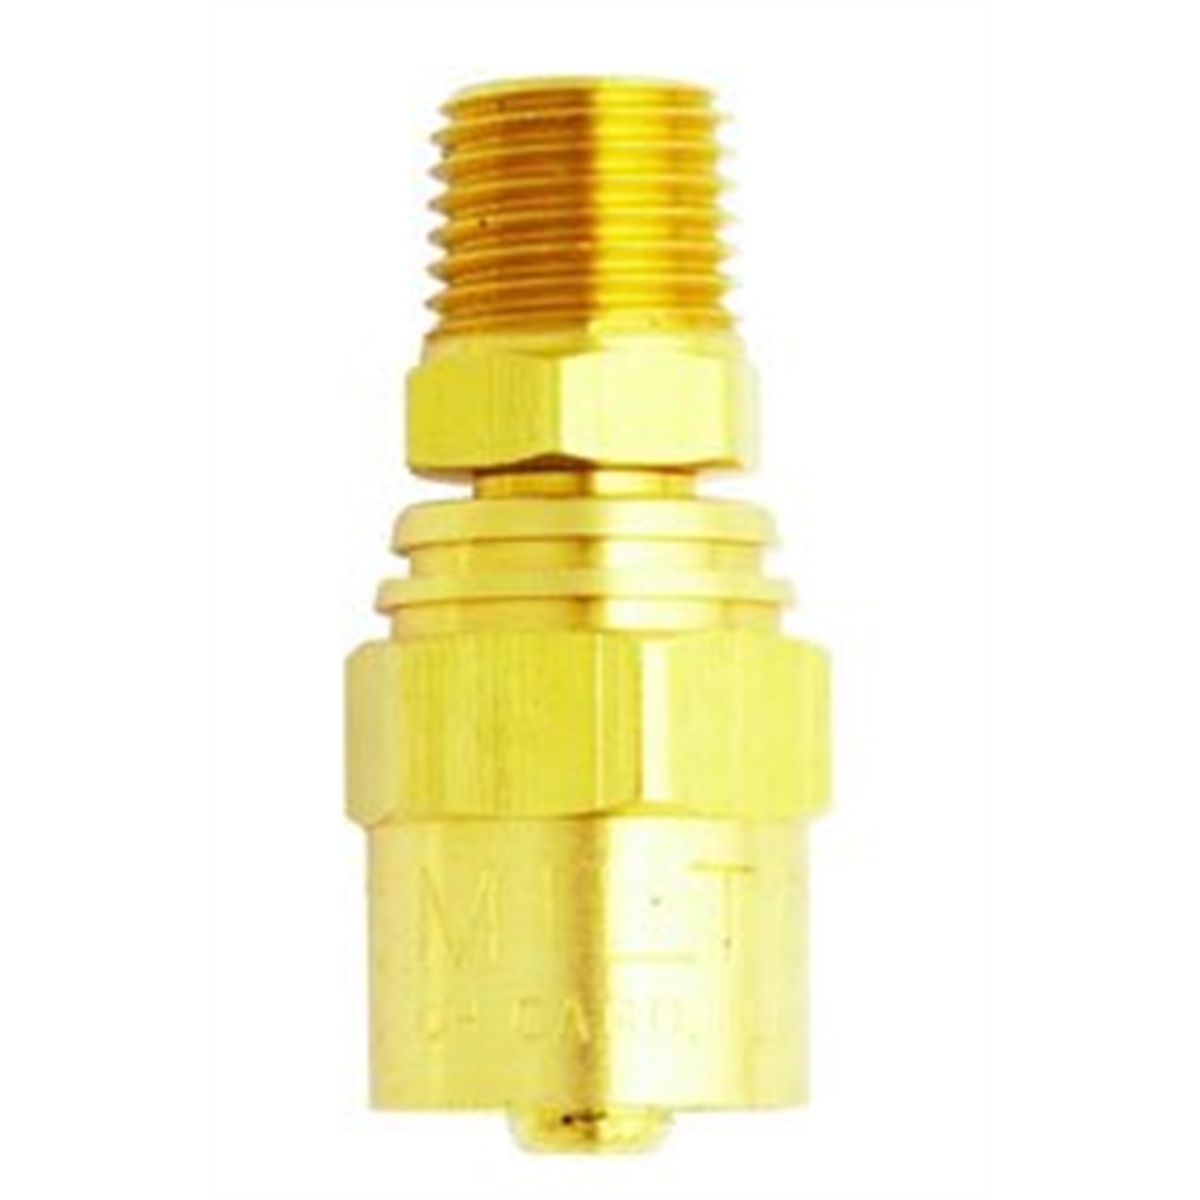 Re-usable Brass Male Air Hose End 1/4 In NPT